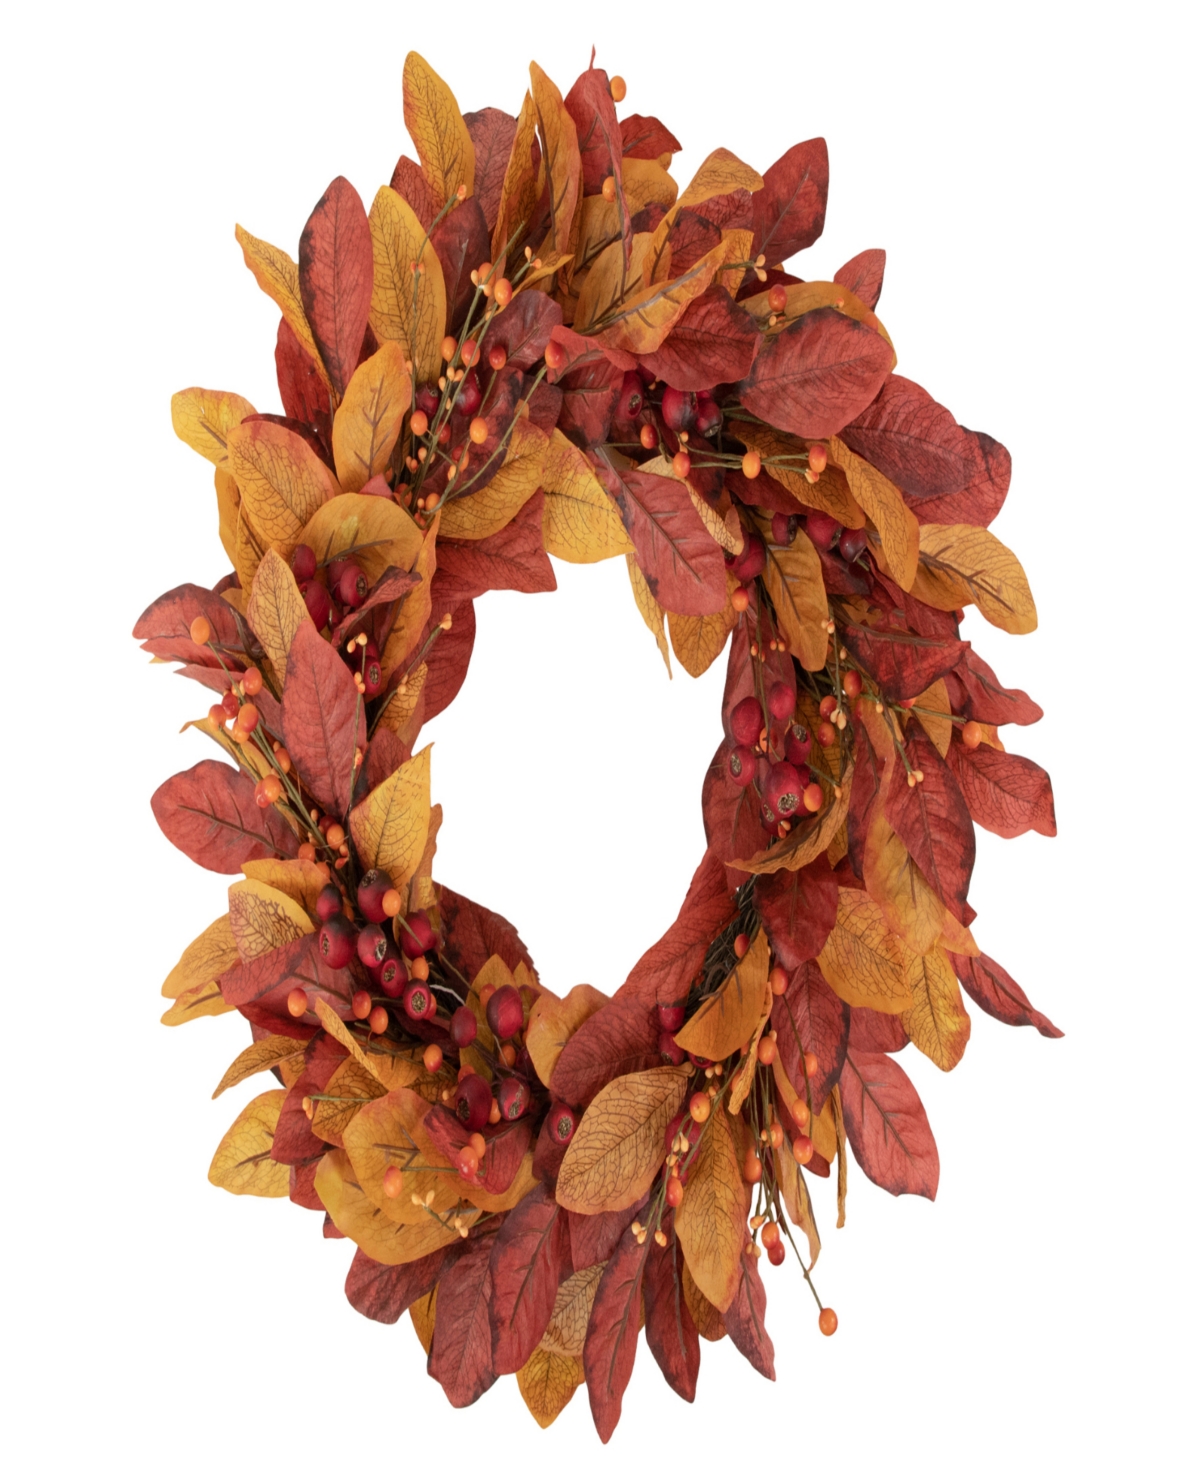 Berries with Leaves Artificial Fall Harvest Twig Wreath 24" Unlit - Red